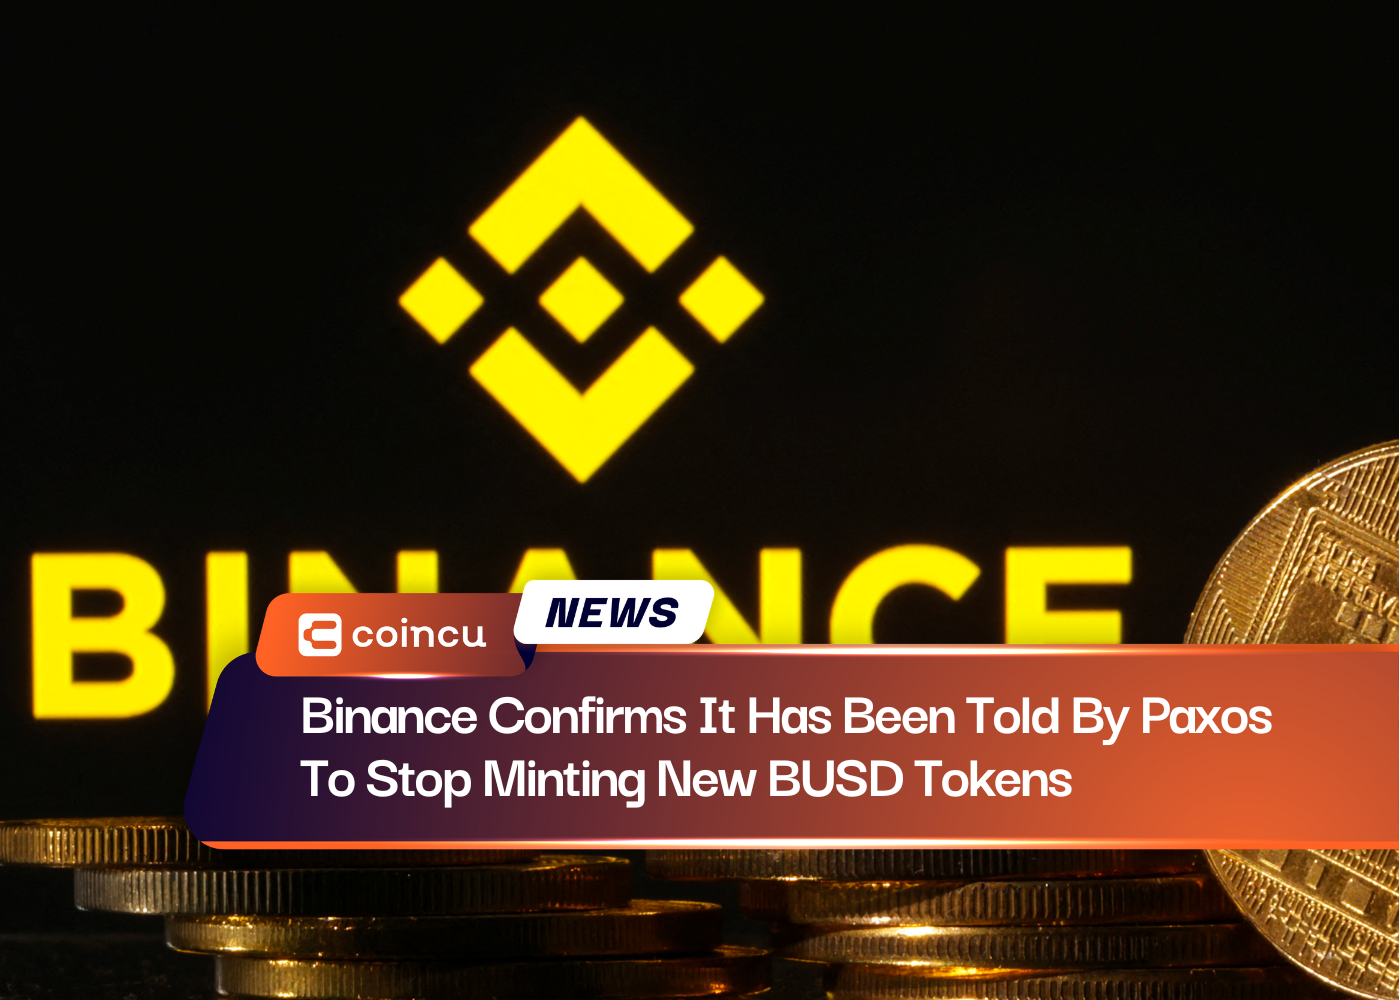 Binance Confirms It Has Been Told By Paxos To Stop Minting New BUSD Tokens